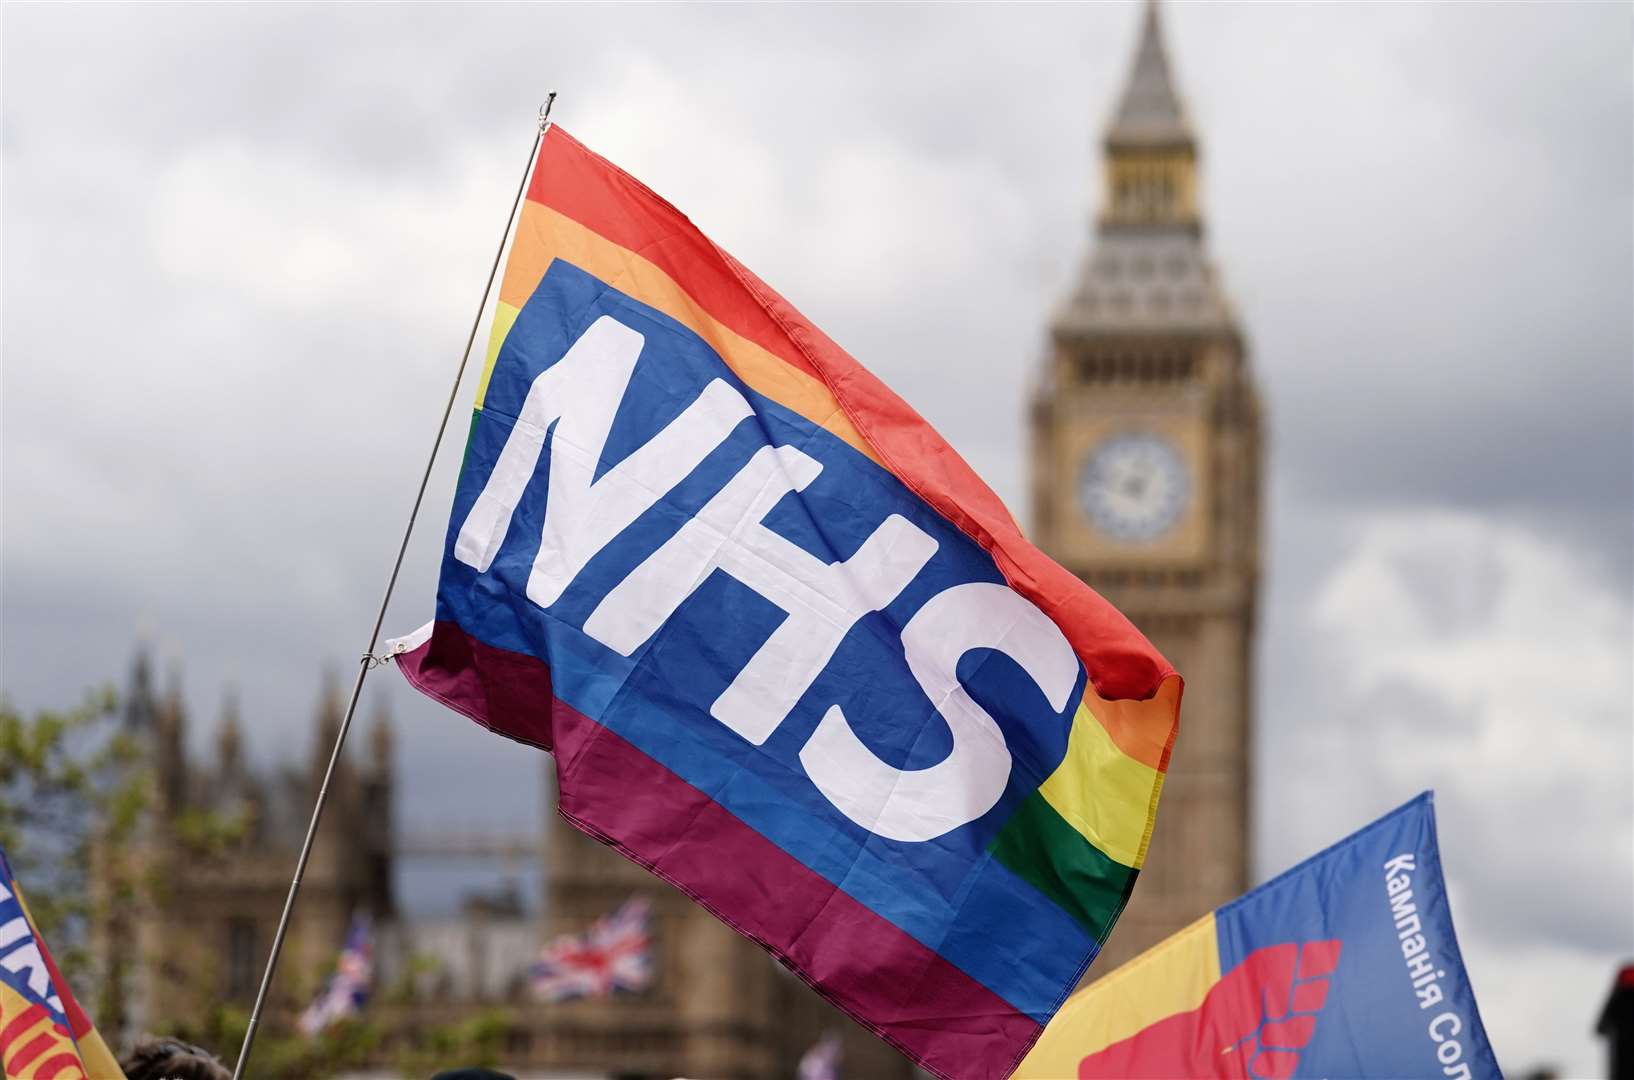 Some 648,000 appointments, procedures and operations have been postponed as a result of the strikes in England since December (Jordan Pettitt/PA)